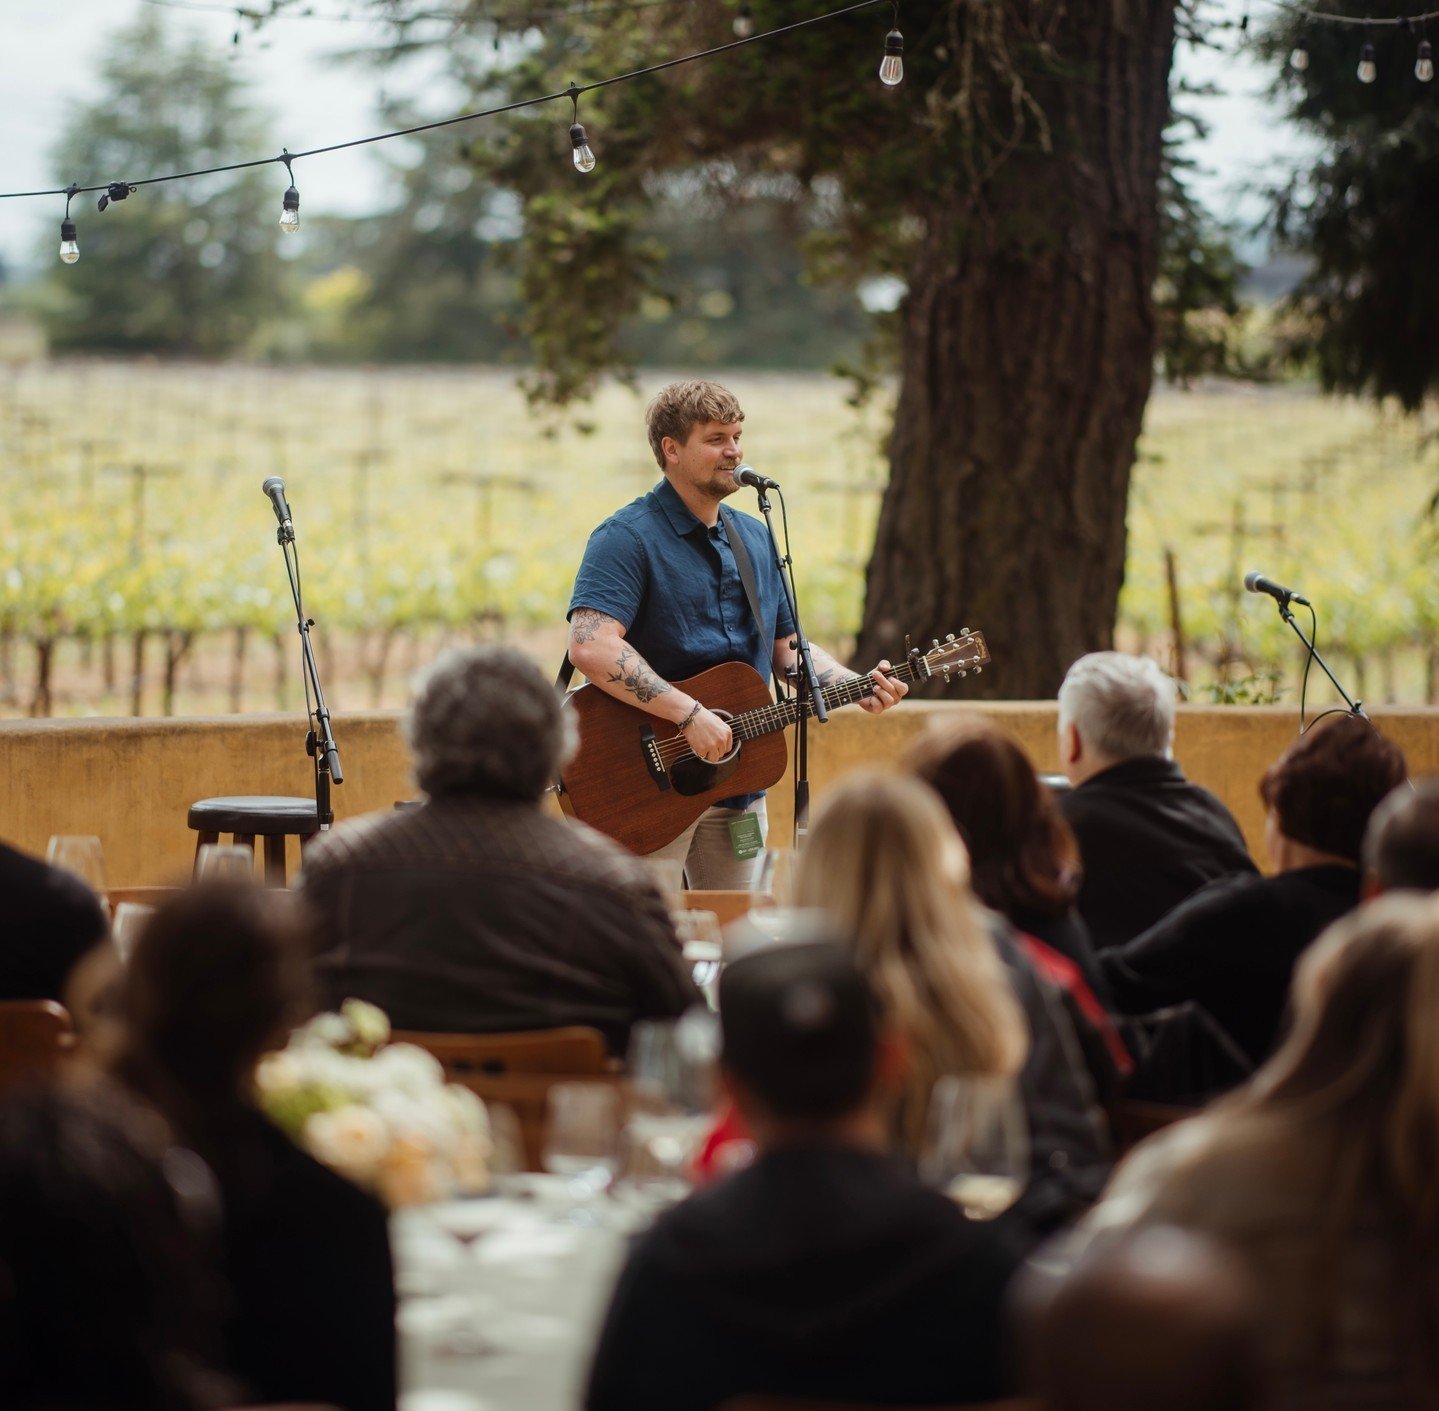 We had such a blast watching @levihummon perform at @backstagewinery for @liveinthevineyard Goes Country!